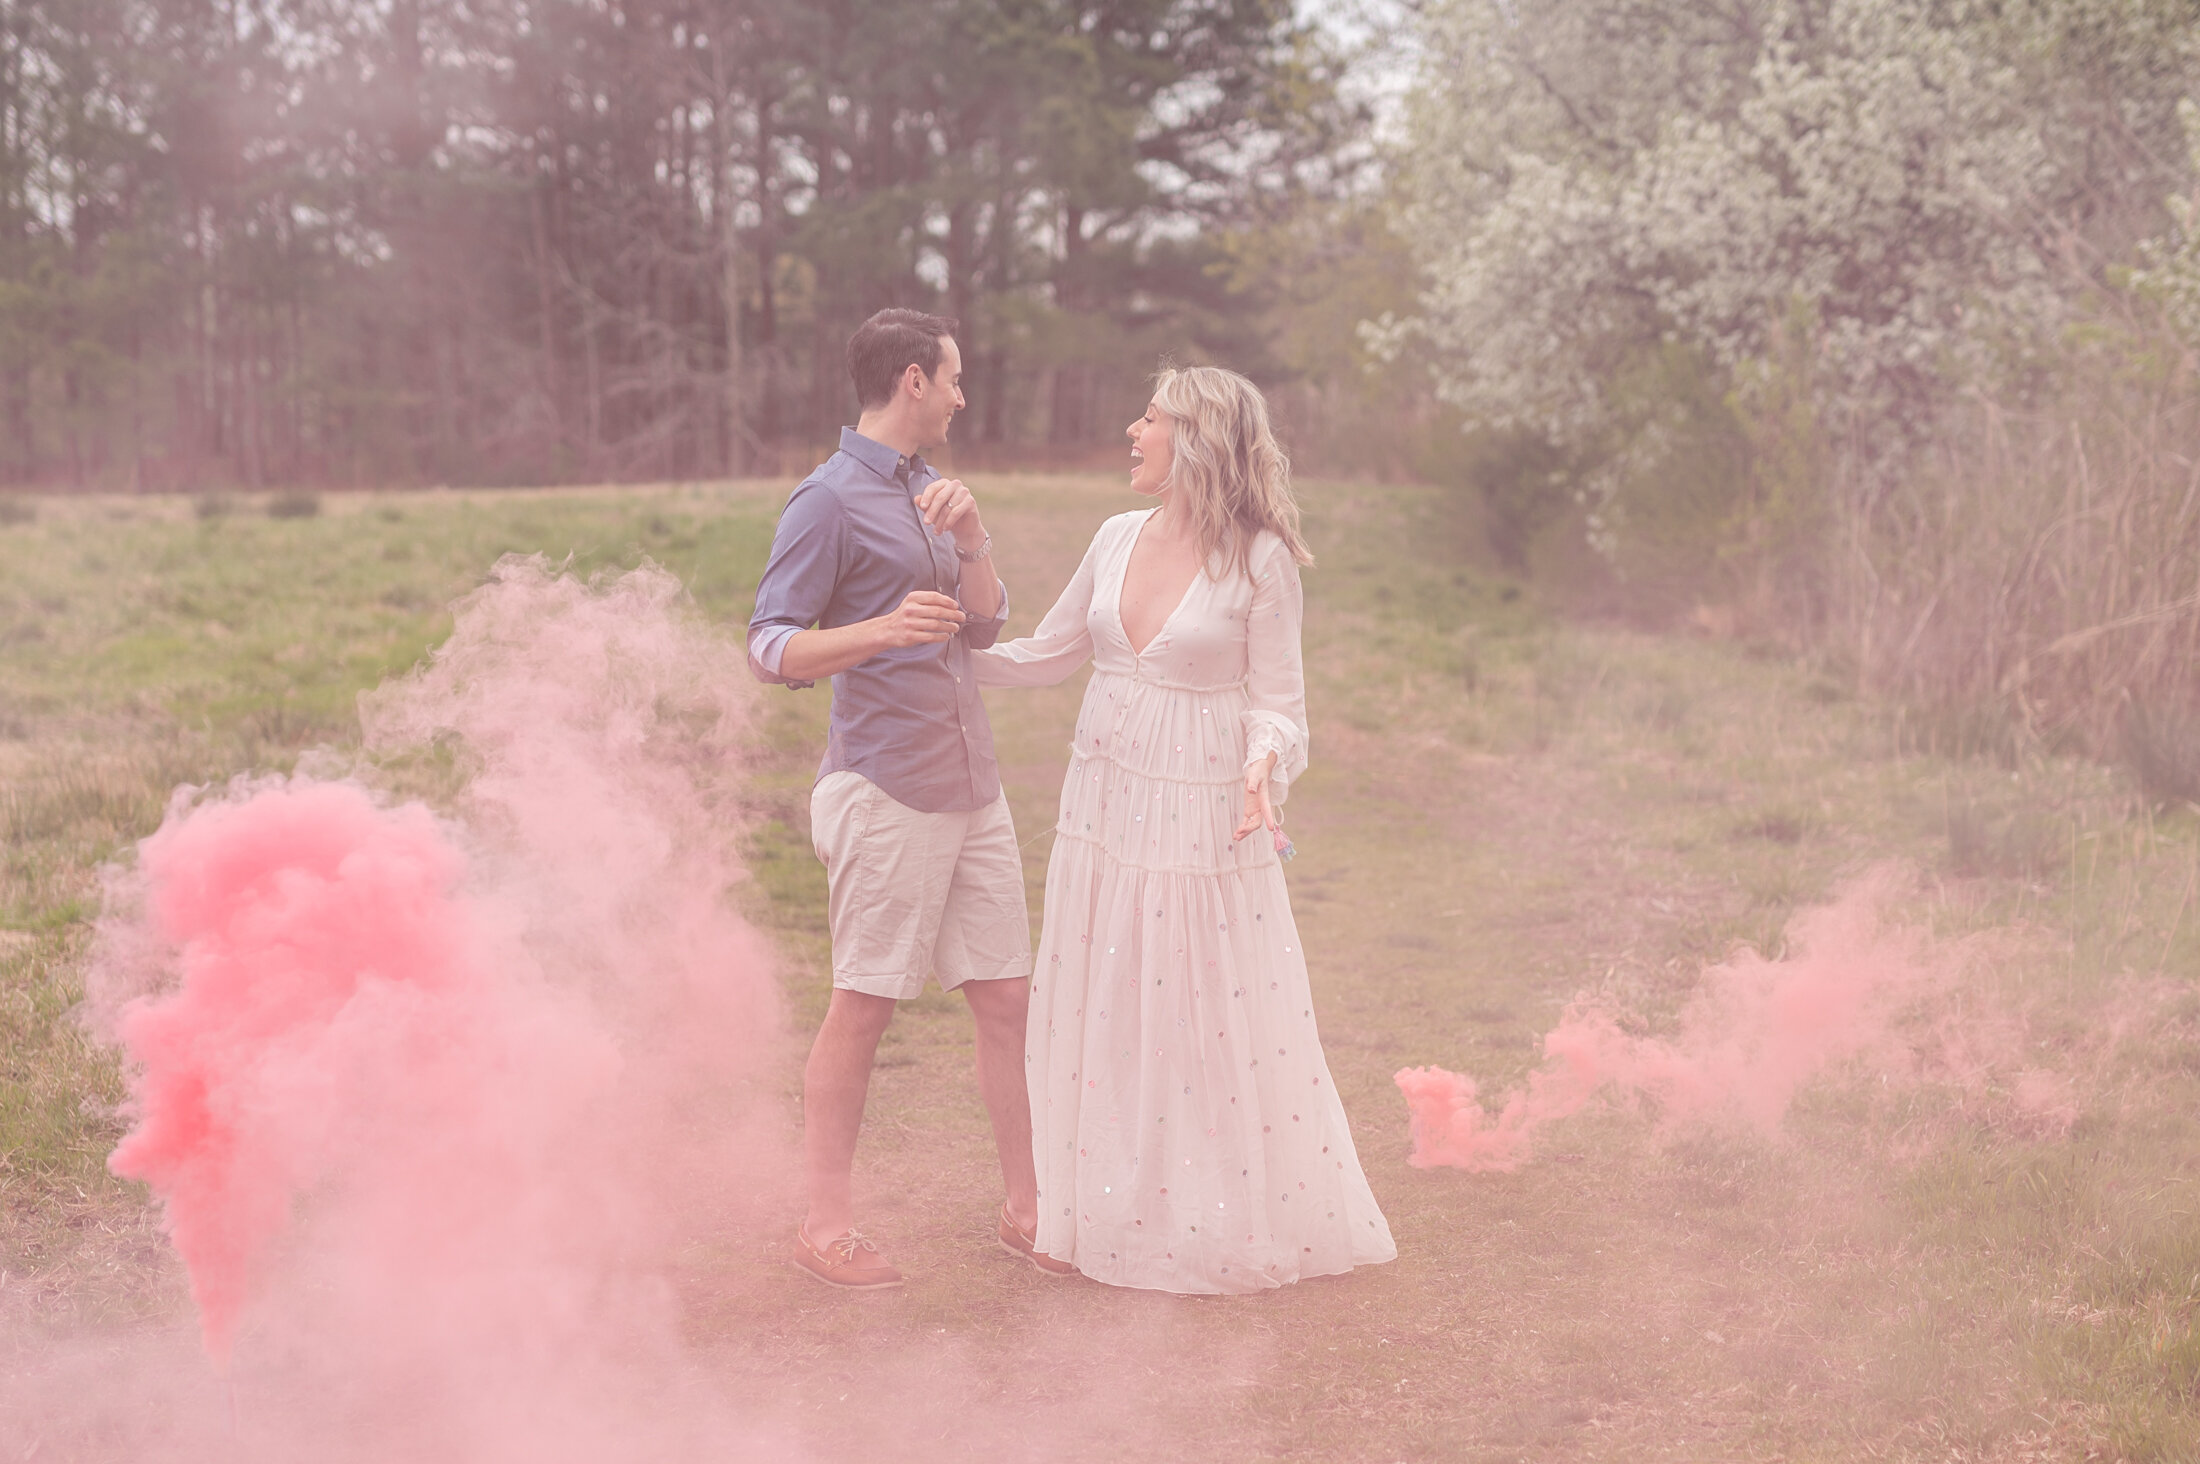 Gender Reveal Girl Baby Pregnancy Photo in Park With Pink Smoke Bomb,  Nature Photography Digital Backdrop Announcement, Maternity or Baby 